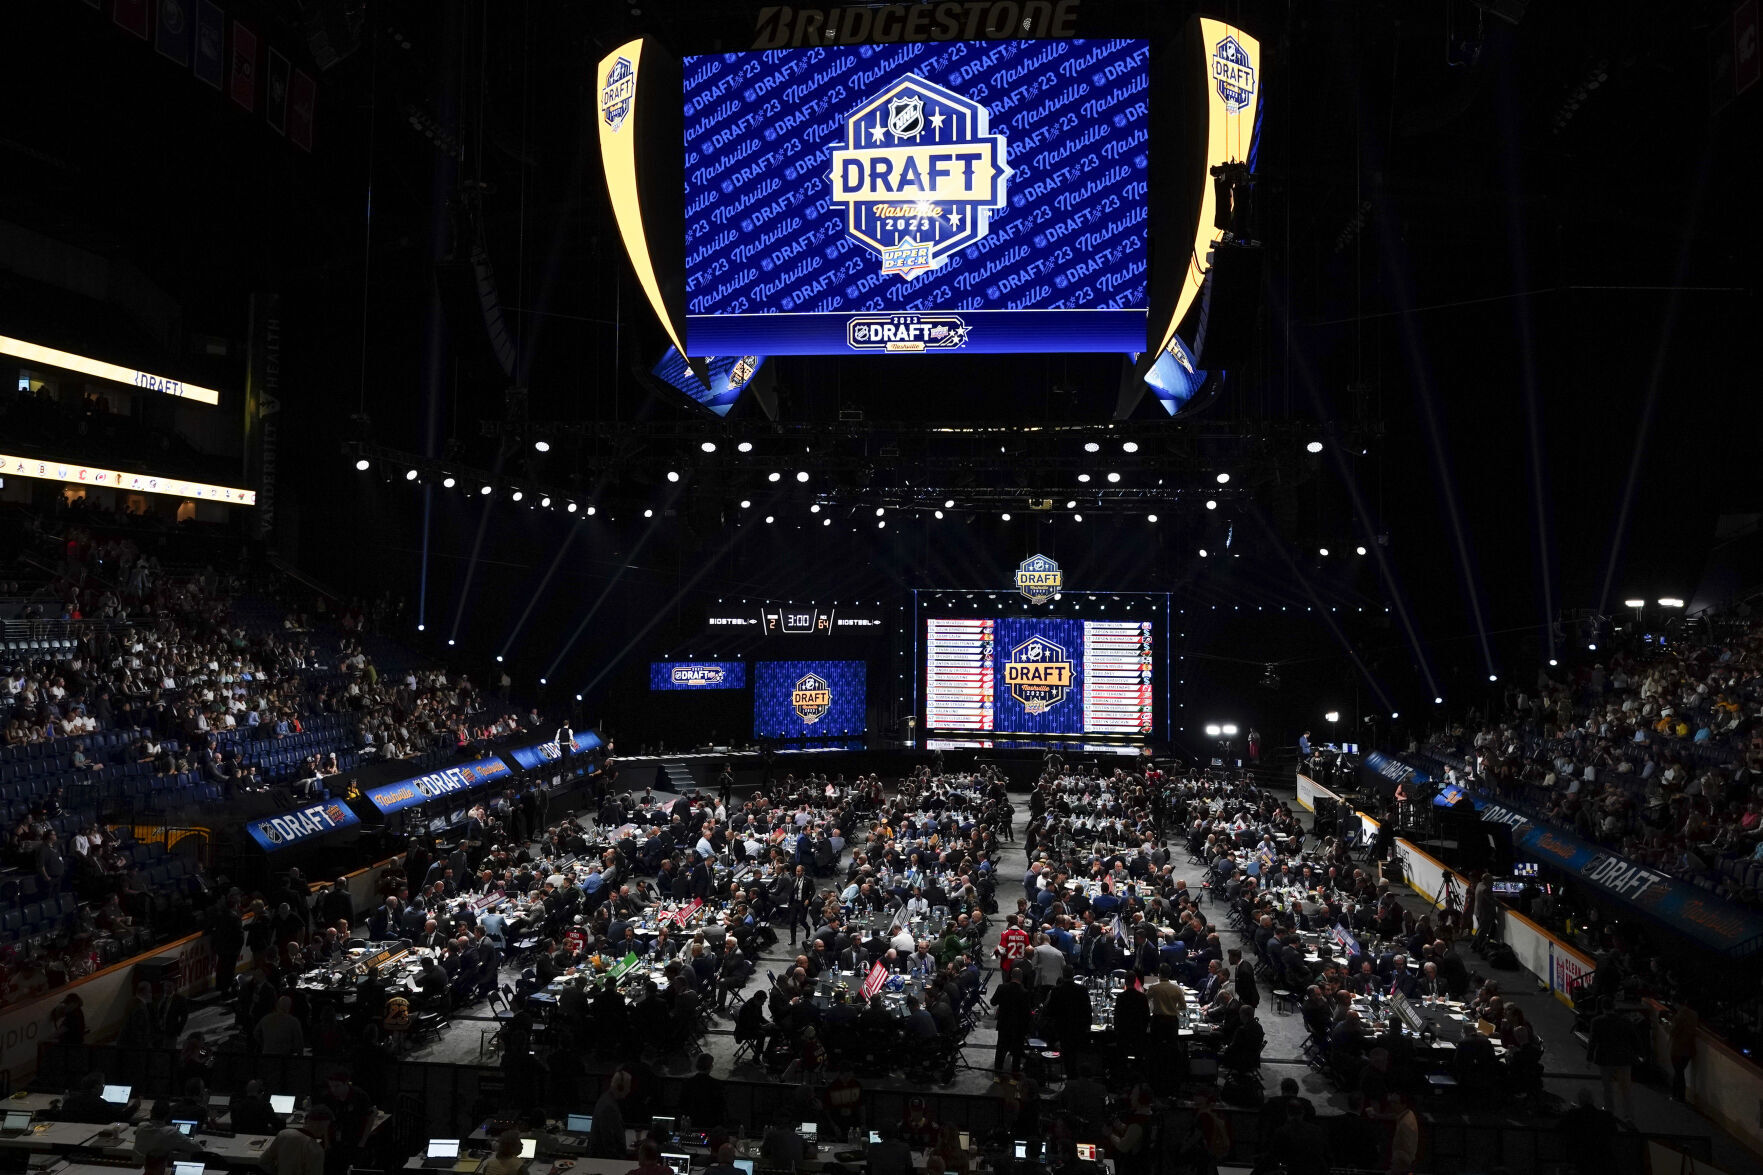 NHL draft wraps up with 11 picks for Chicago, dearth of trades